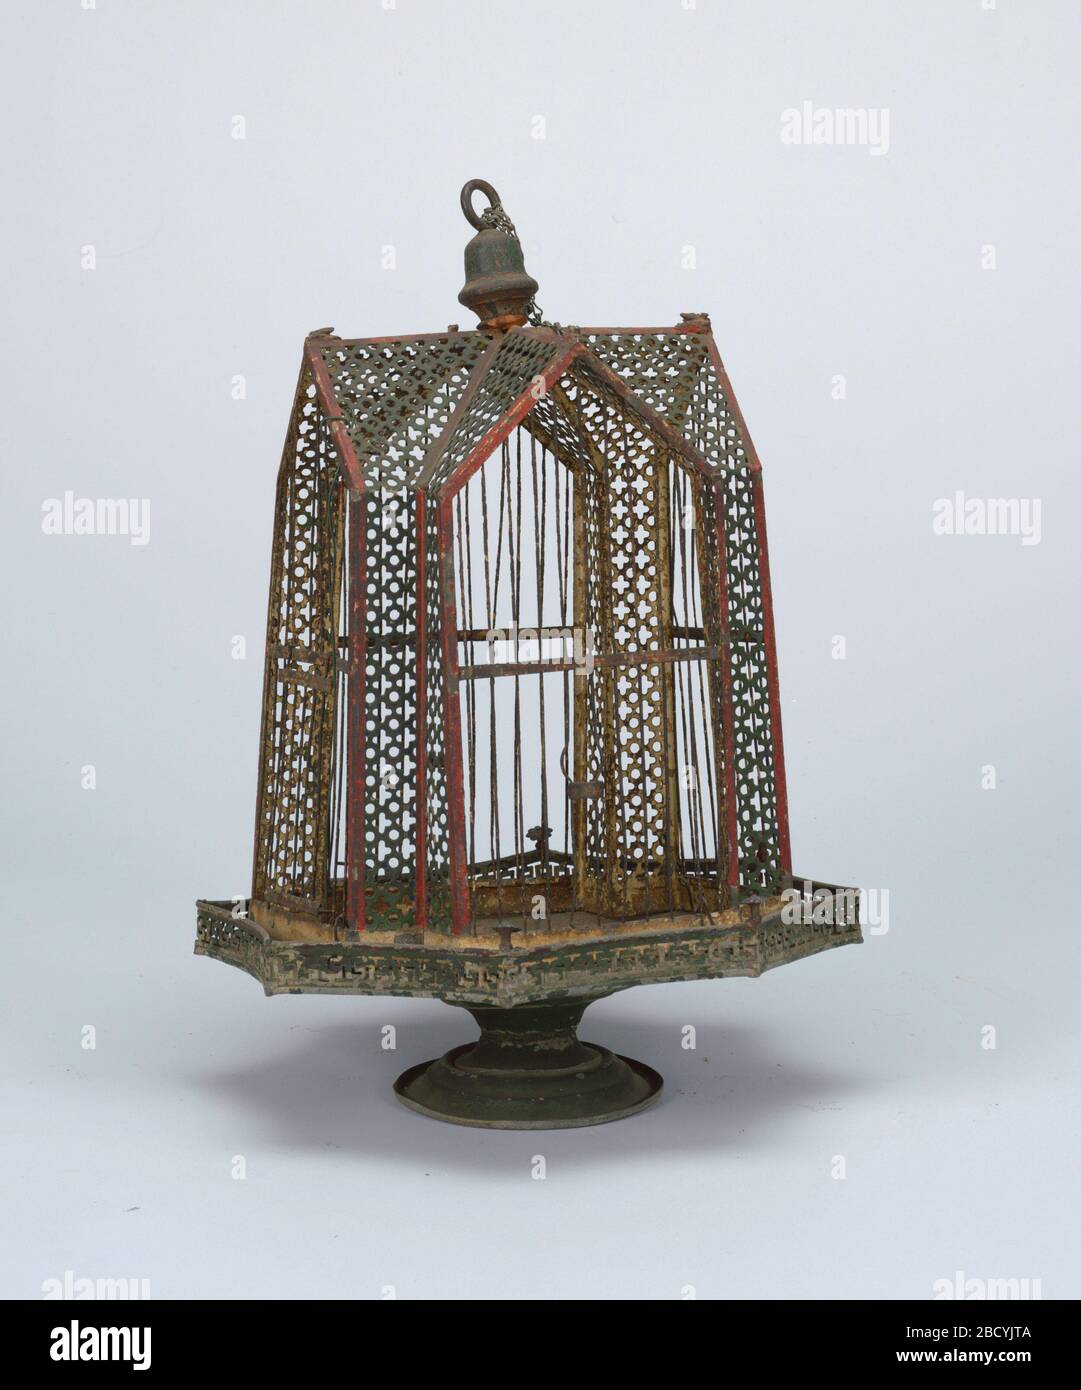 77 Decorative Hanging Bird Cages Stock Photos, High-Res Pictures